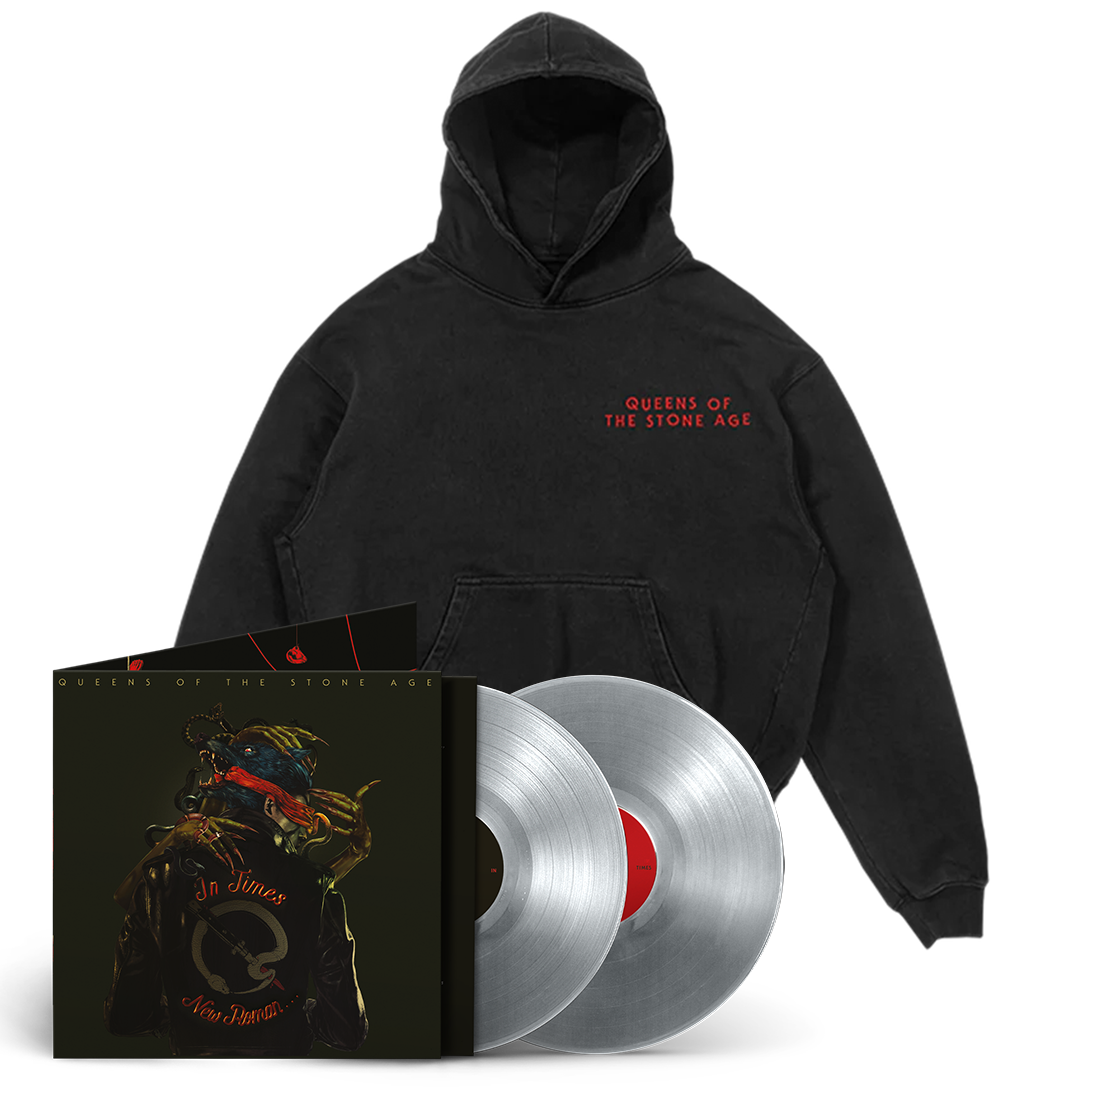 In Times New Roman... Opaque Silver 2lp + In Times New Roman... Snake Hoodie